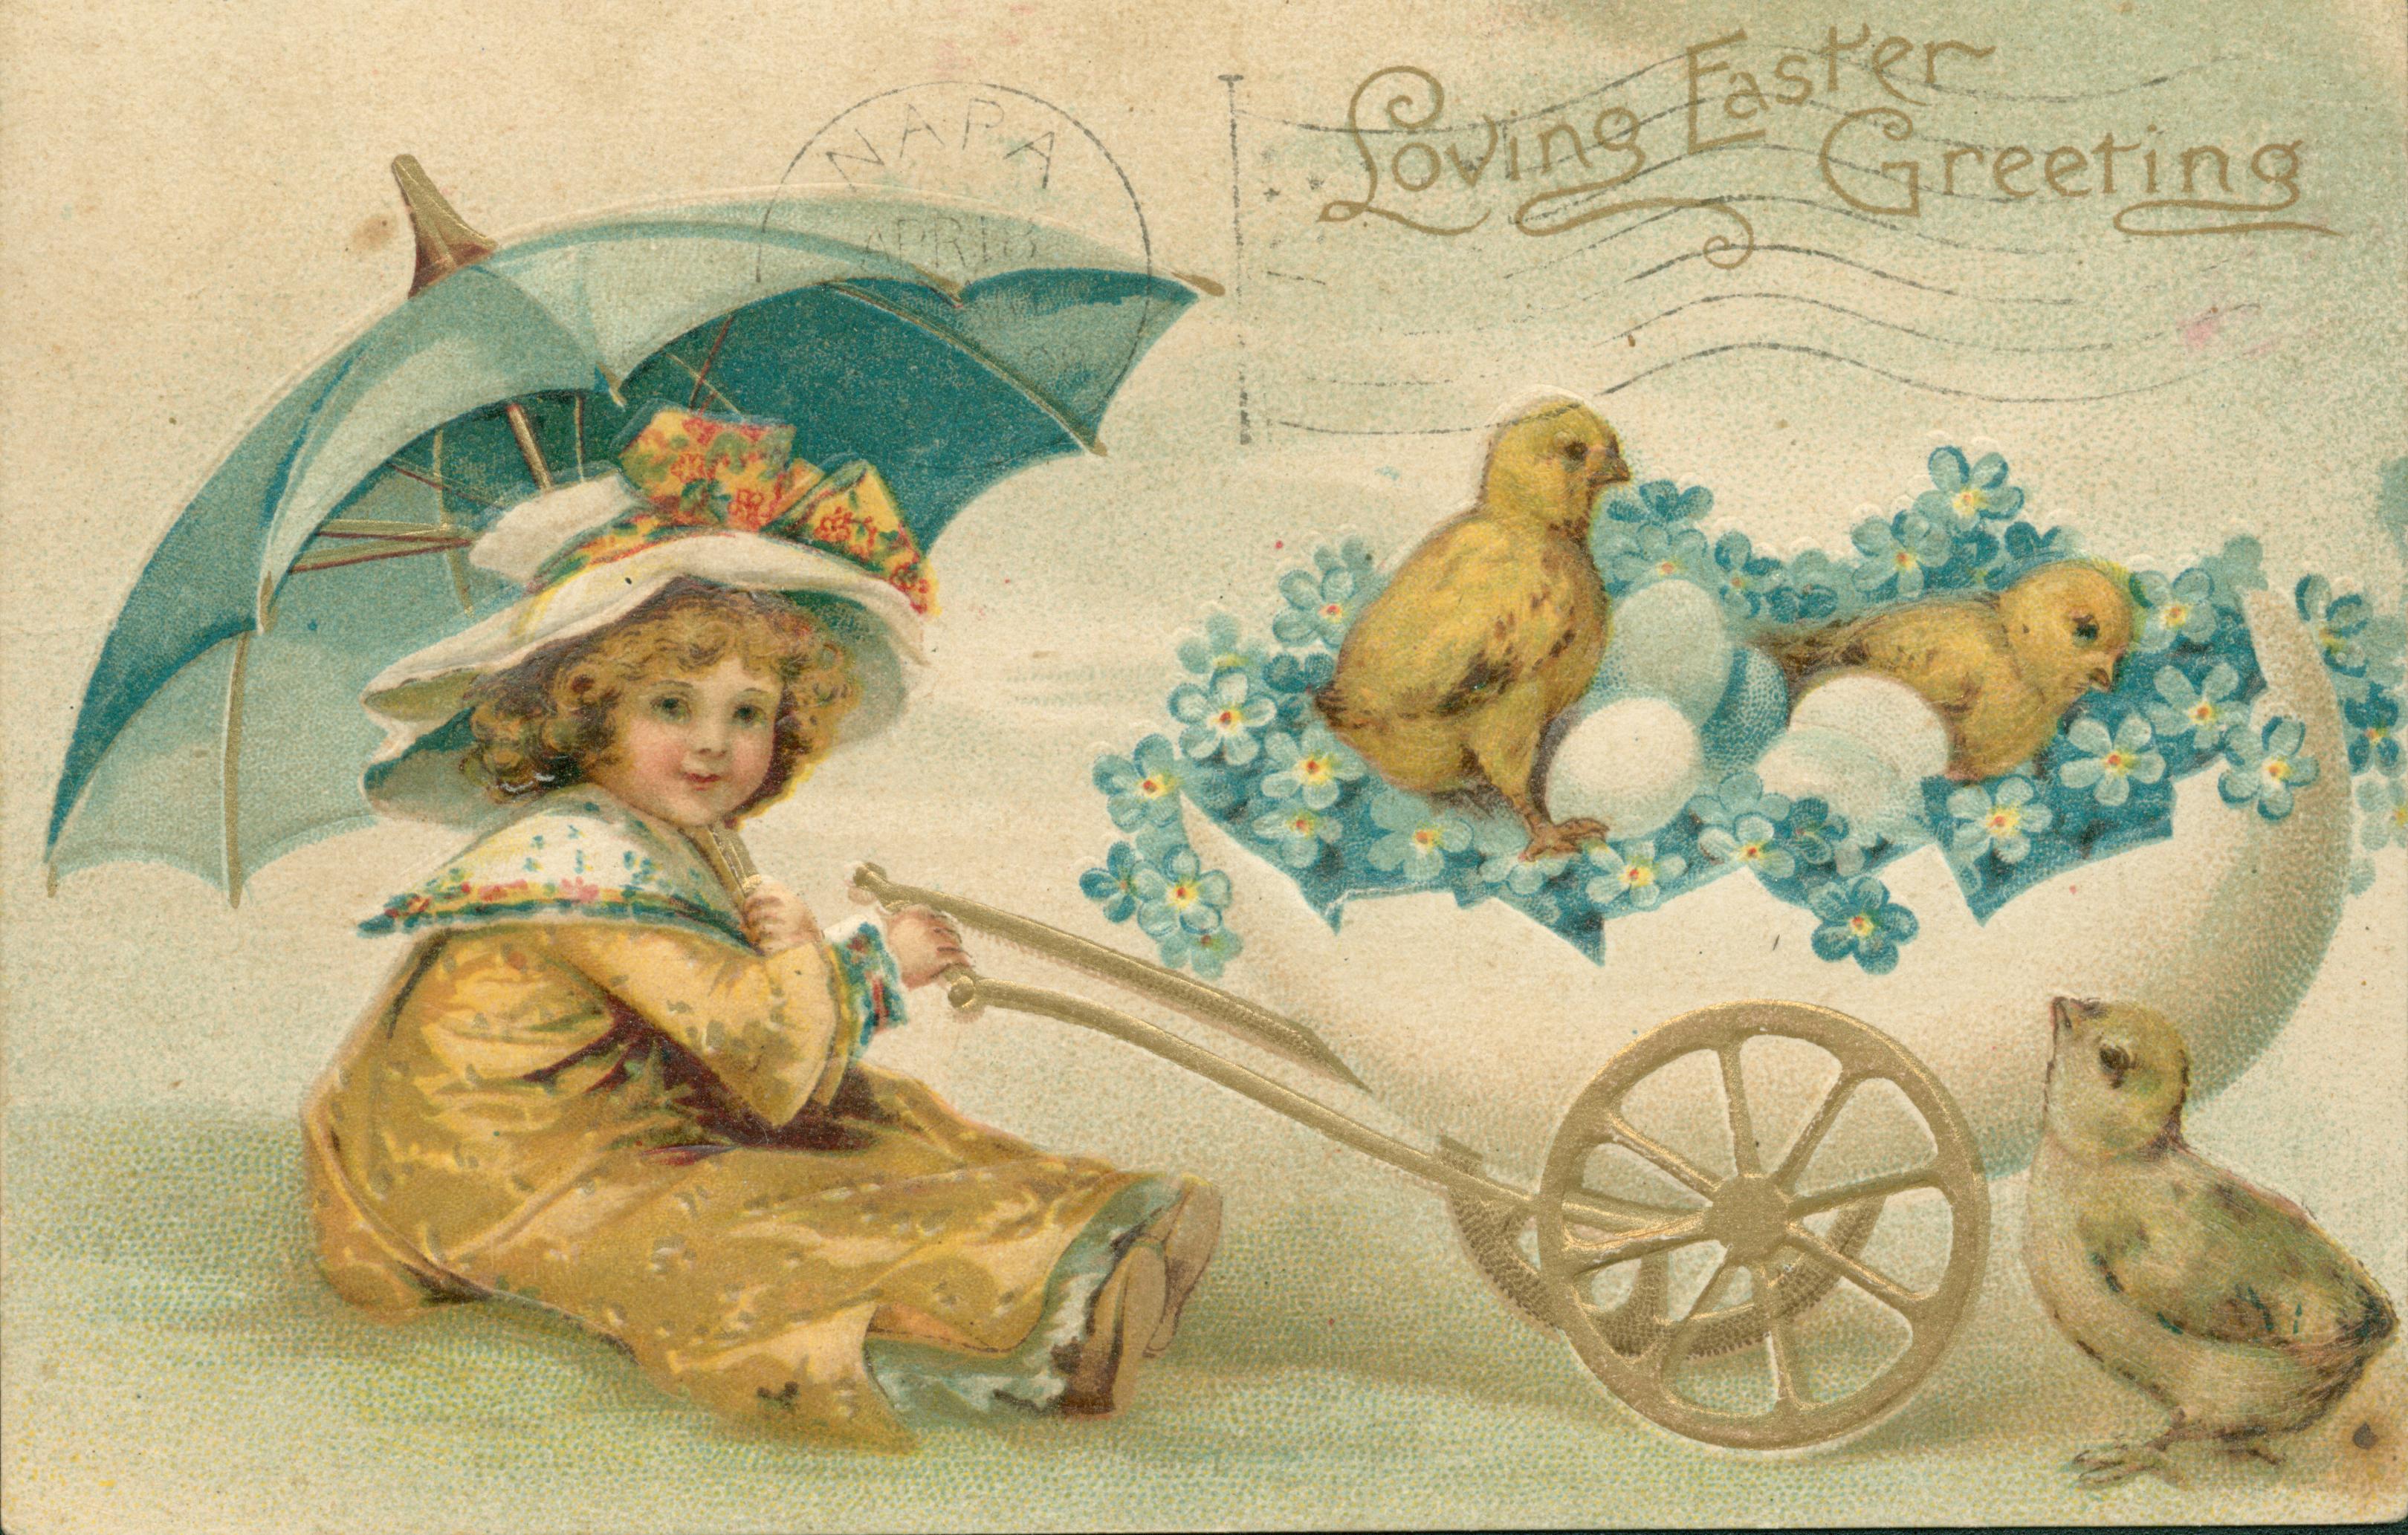 Drawing of a girl holding onto a cart with chicks and eggs in it.